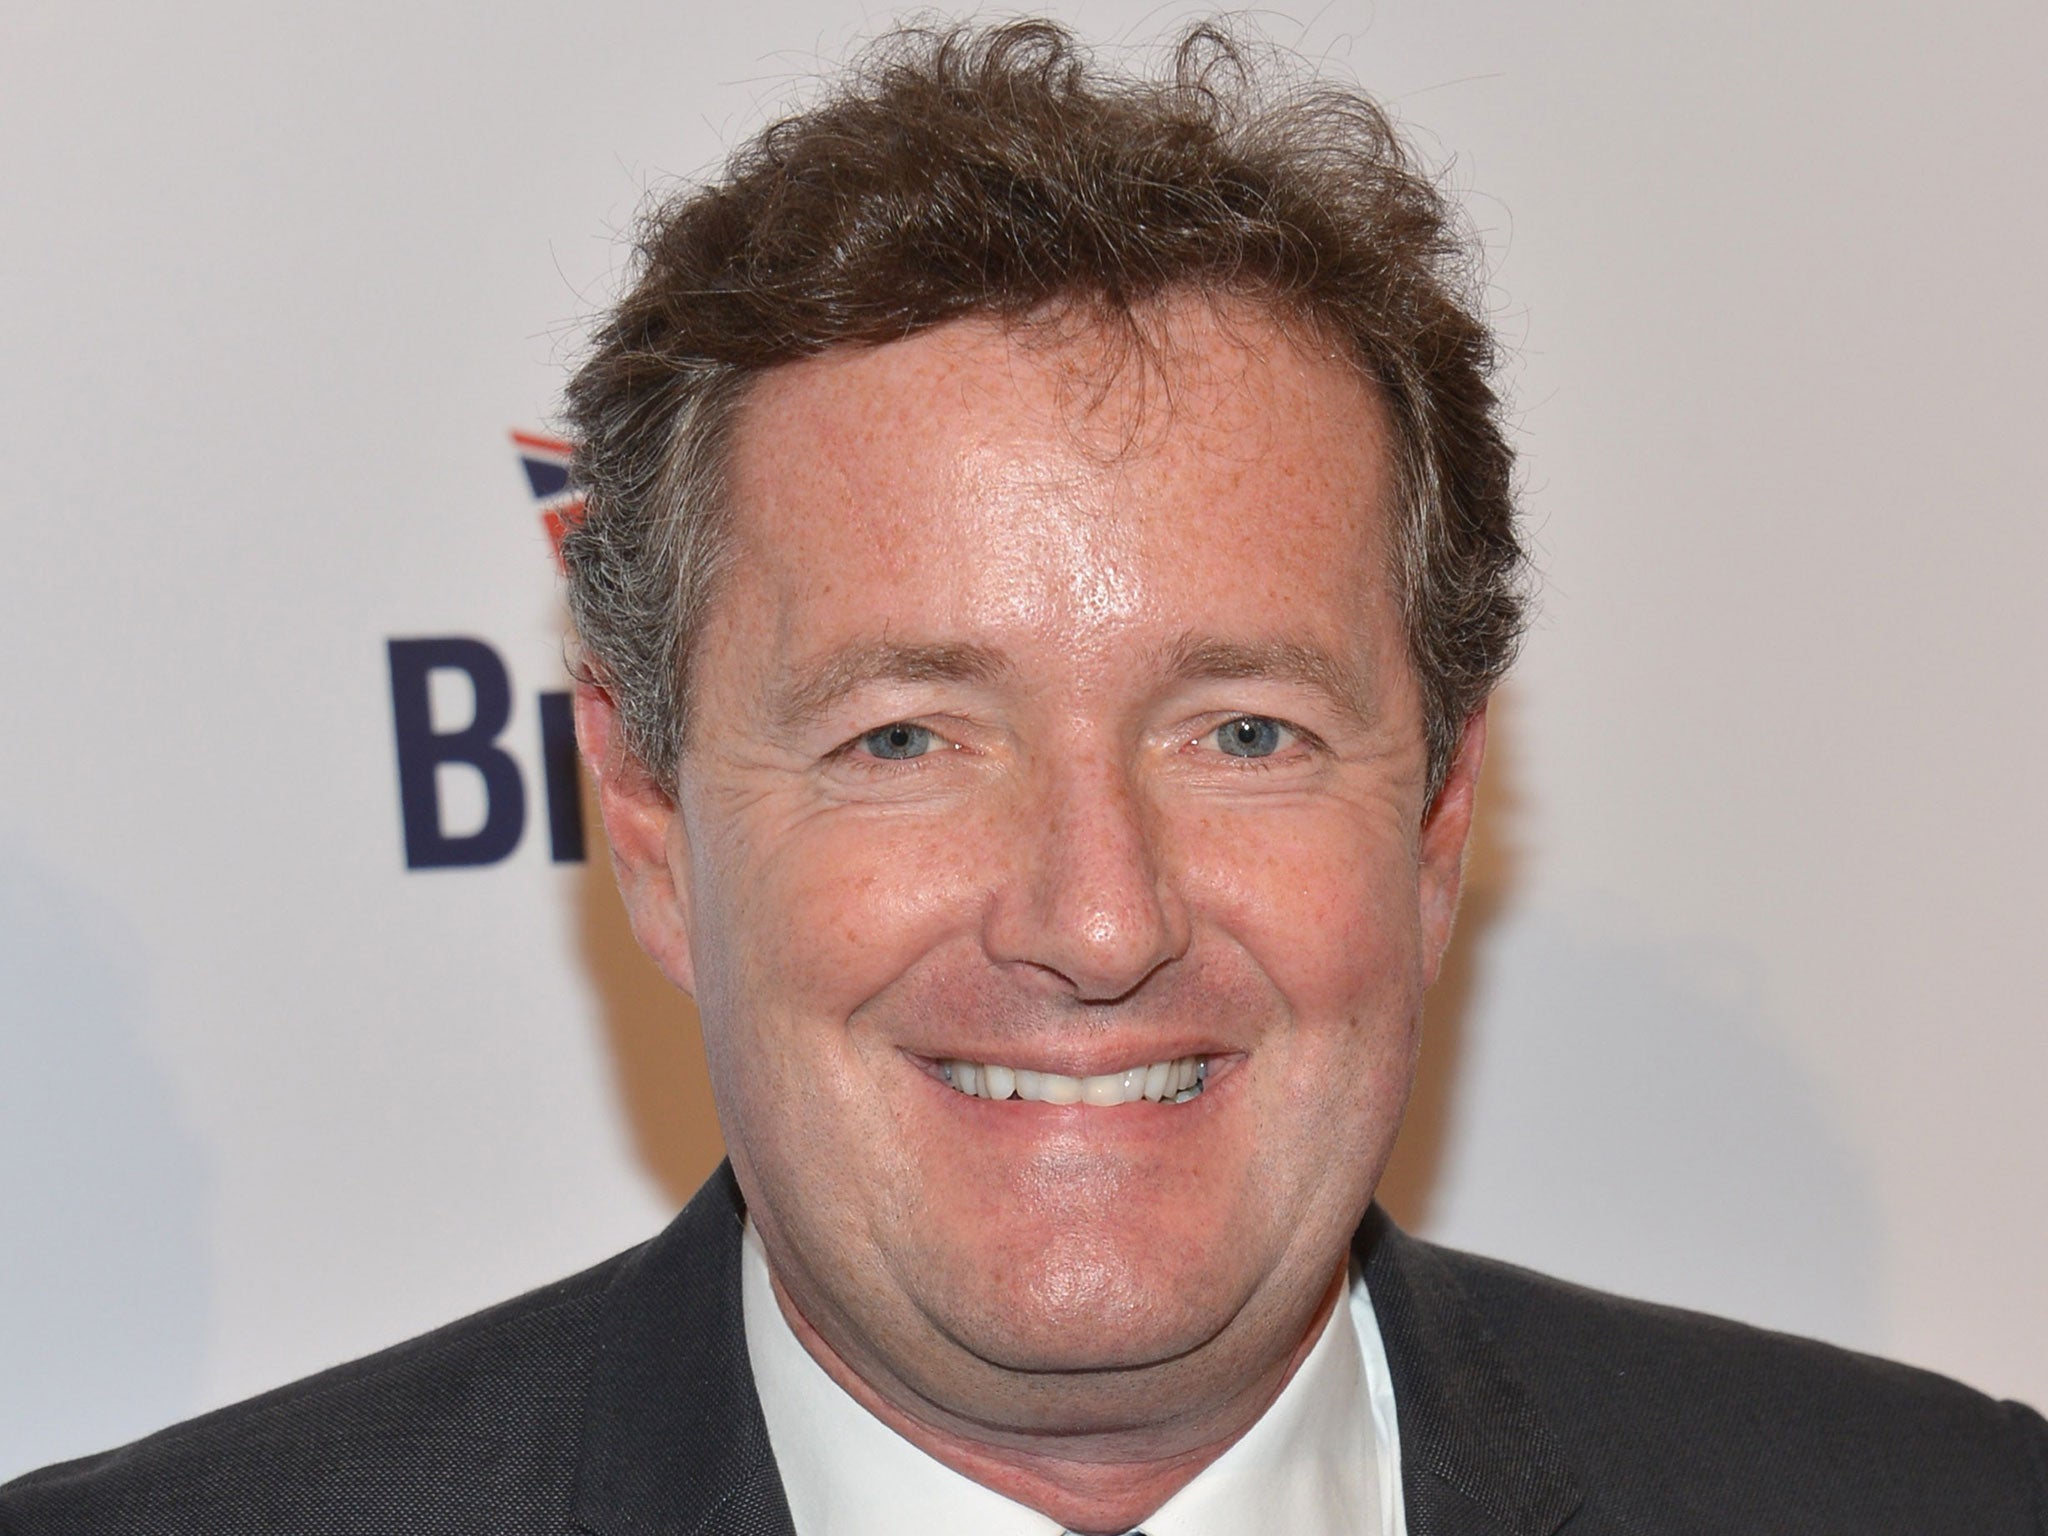 Ministers are once again ready to brave Piers Morgan’s combative style